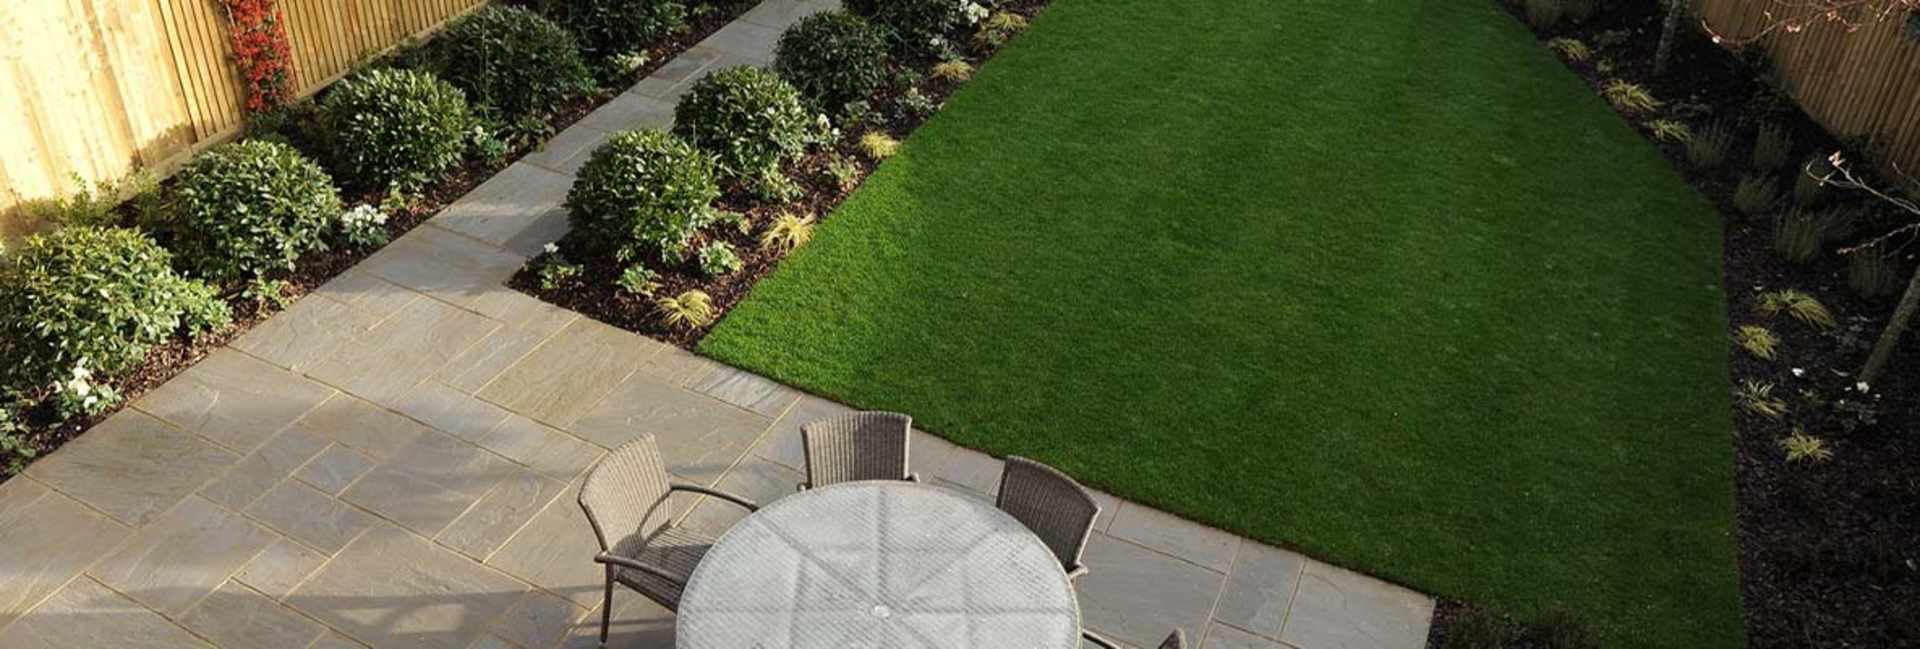 How to make the most of your outdoor space - Body One | Berkeley Inspirations